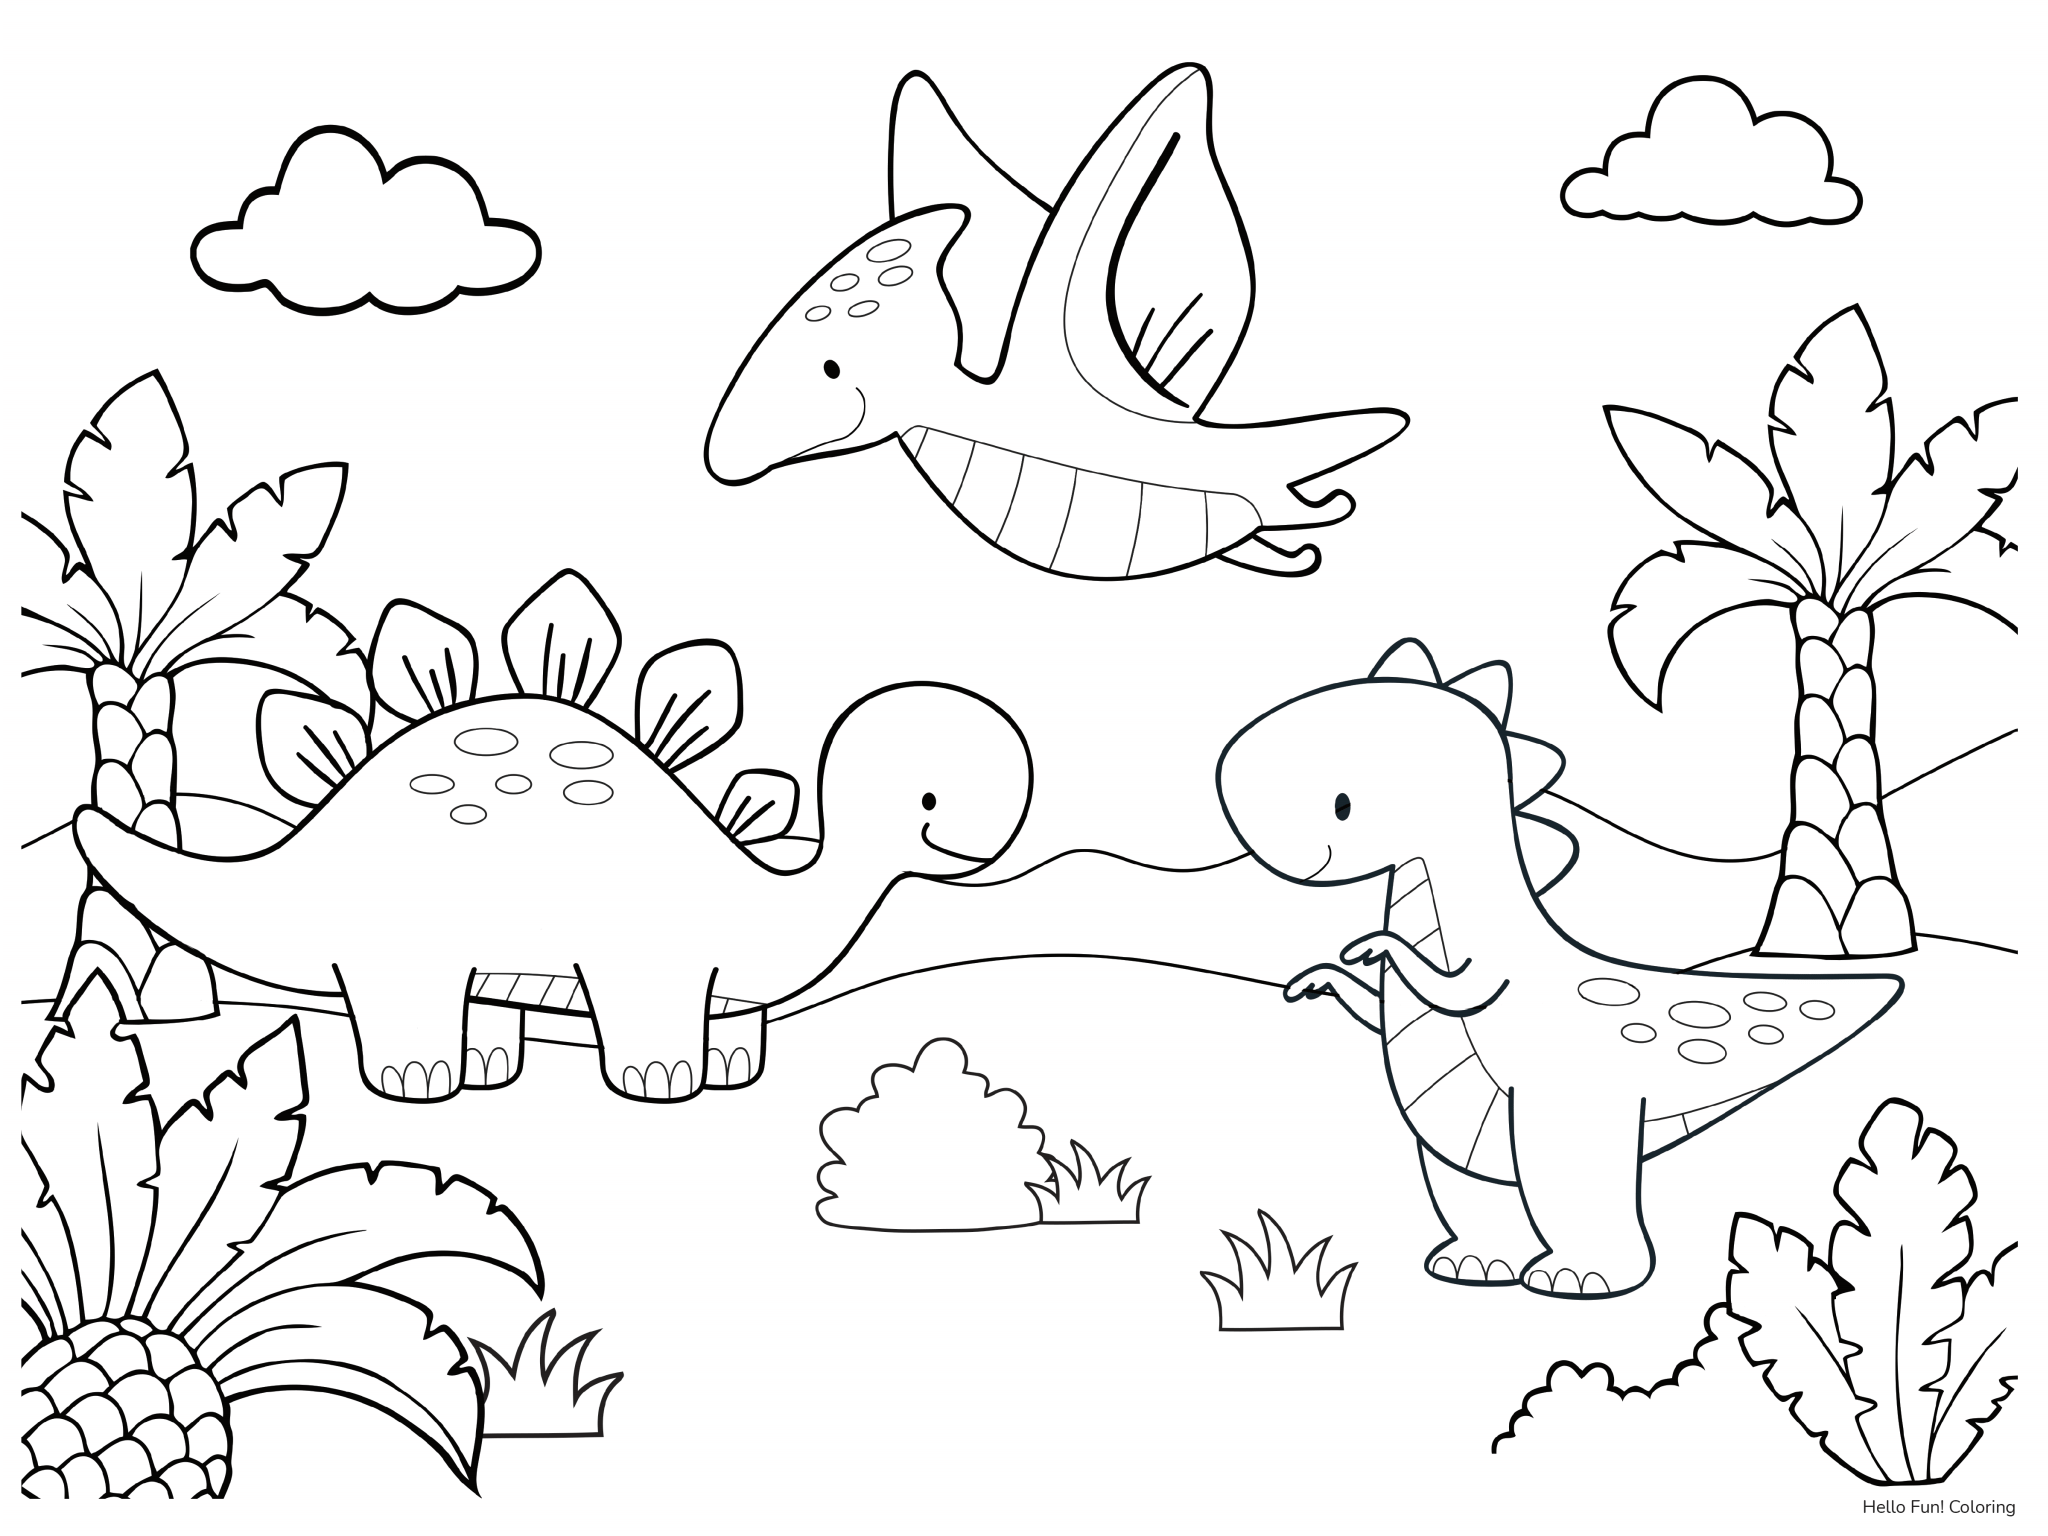 https://cdn.shopify.com/s/files/1/0012/7690/3495/products/3-Dinosaur-Placemat.png?v=1678713545